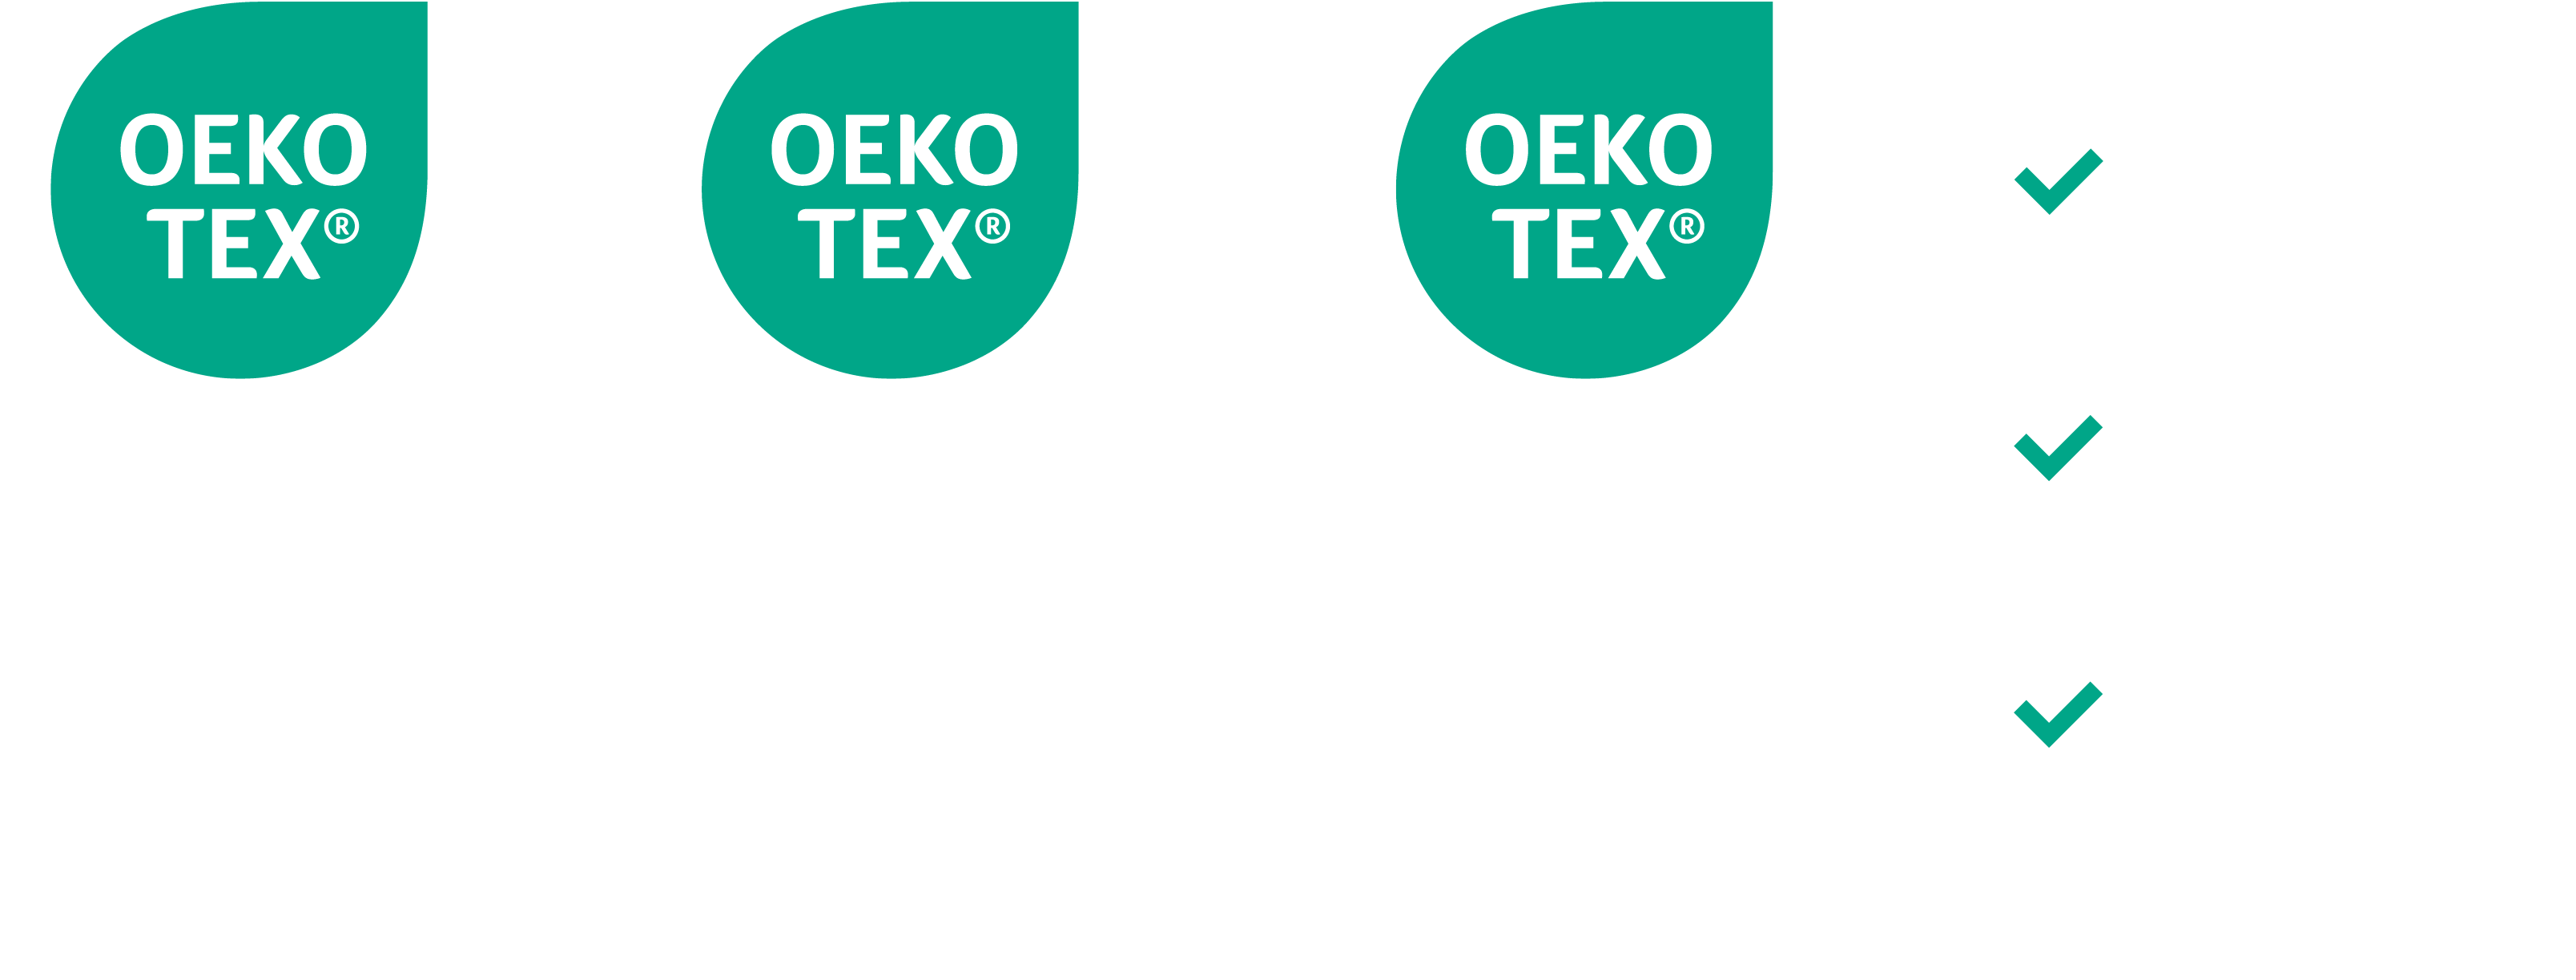 OEKO-TEX - What is MADE IN GREEN by OEKO-TEX®? MADE IN GREEN is a traceable  consumer label for products made with materials tested for harmful  substances, made in environmentally friendly facilities and